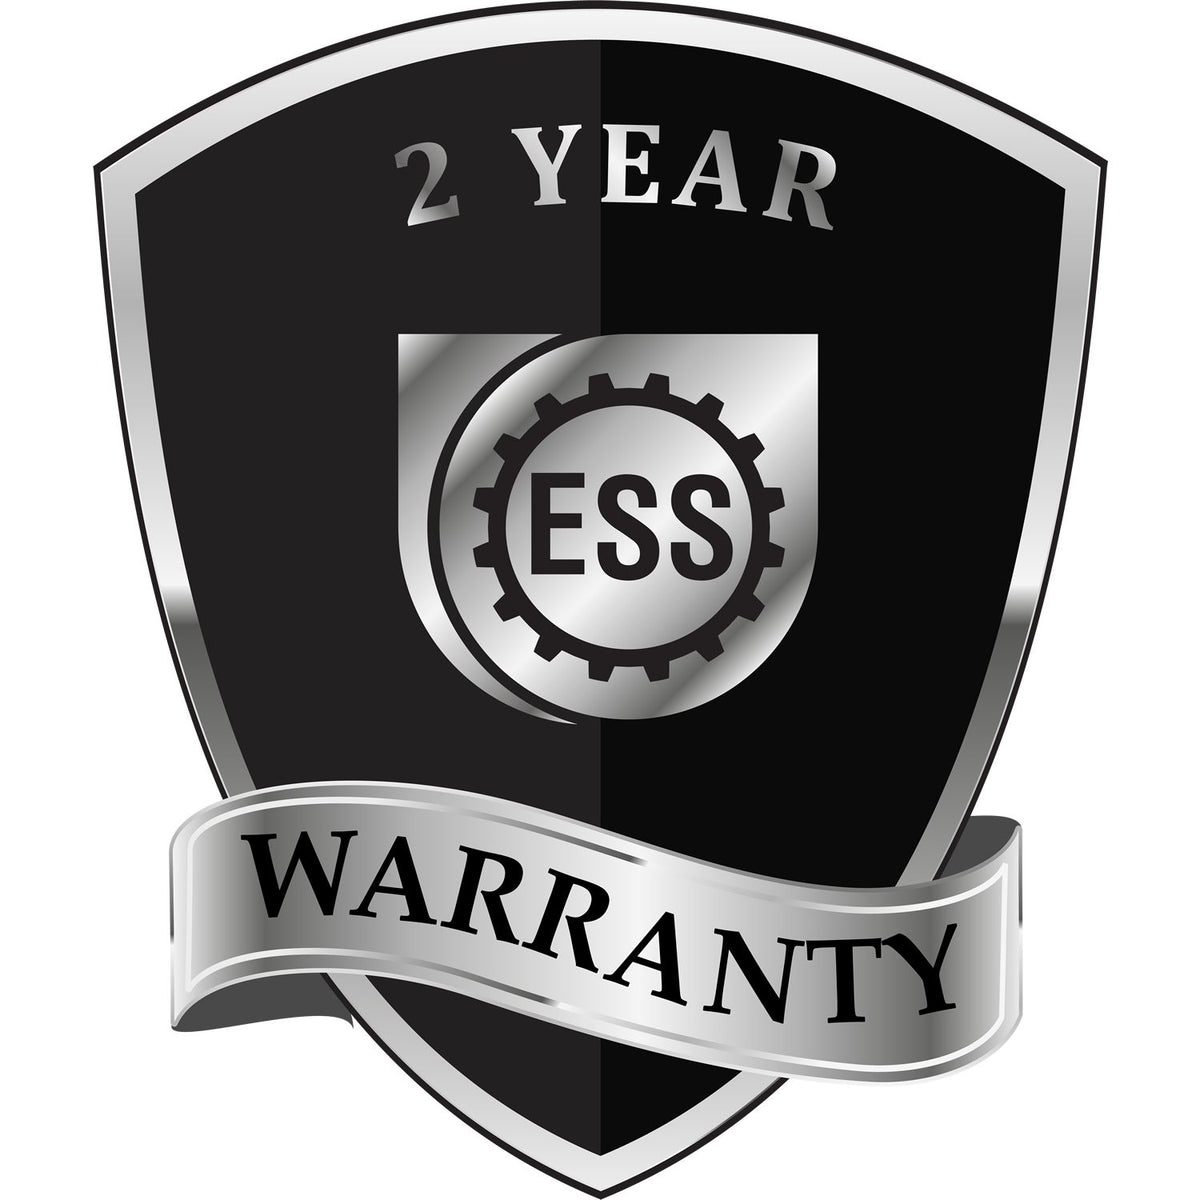 A badge or emblem showing a warranty icon for the Heavy Duty Cast Iron New Hampshire Engineer Seal Embosser